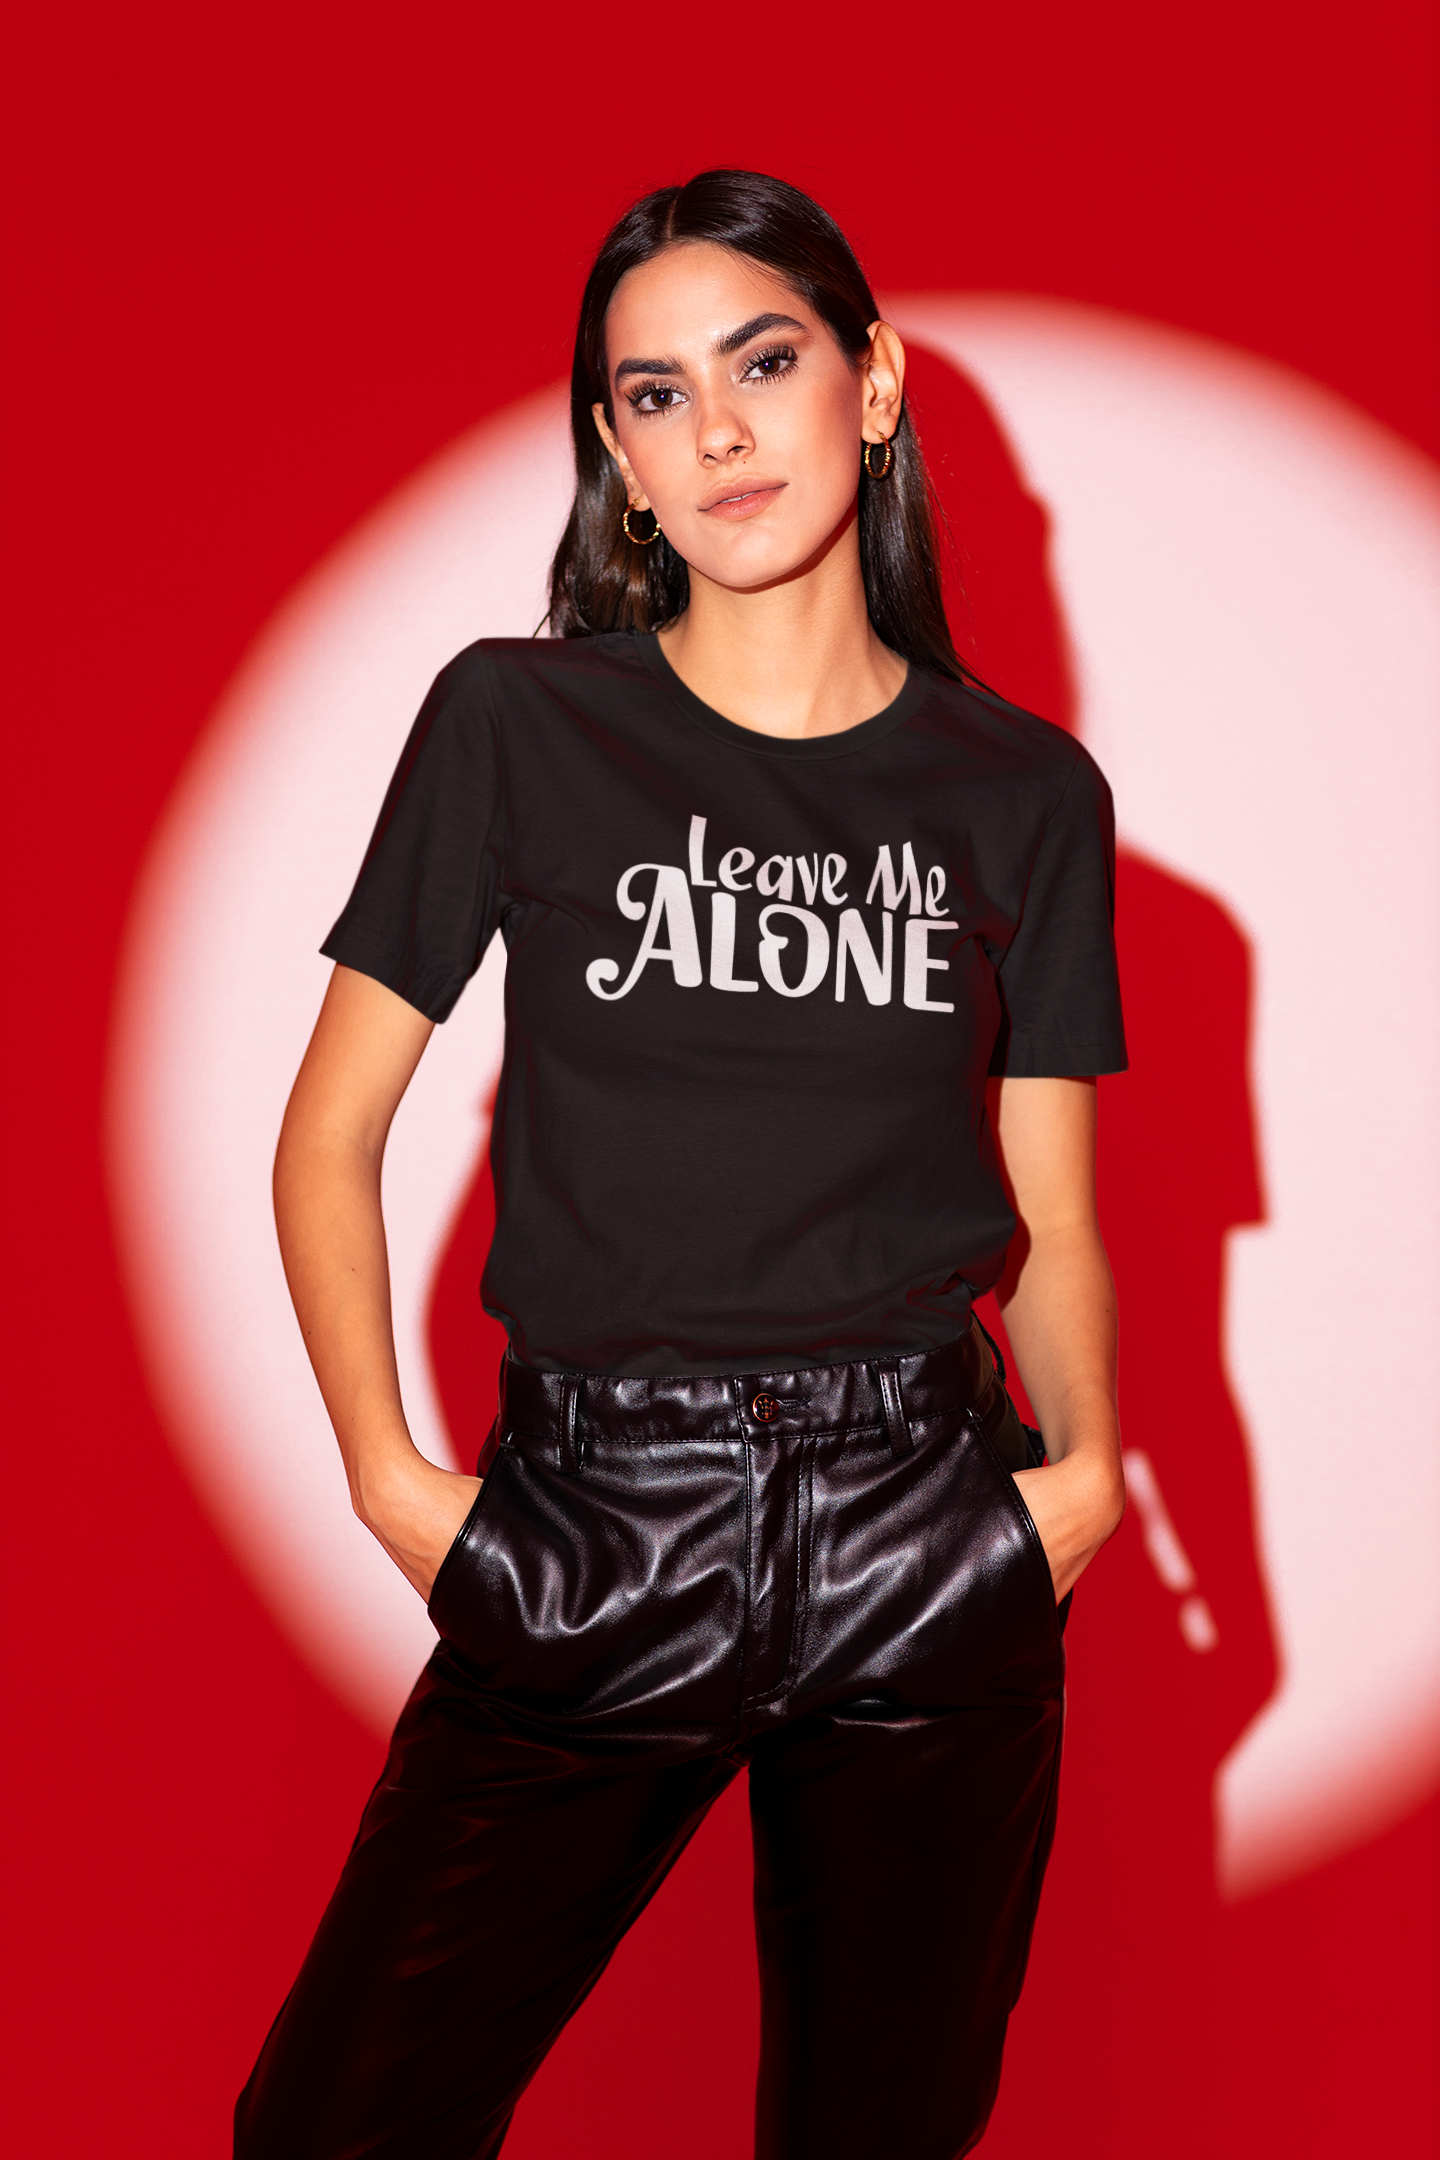 Leave Me Alone - T-shirt